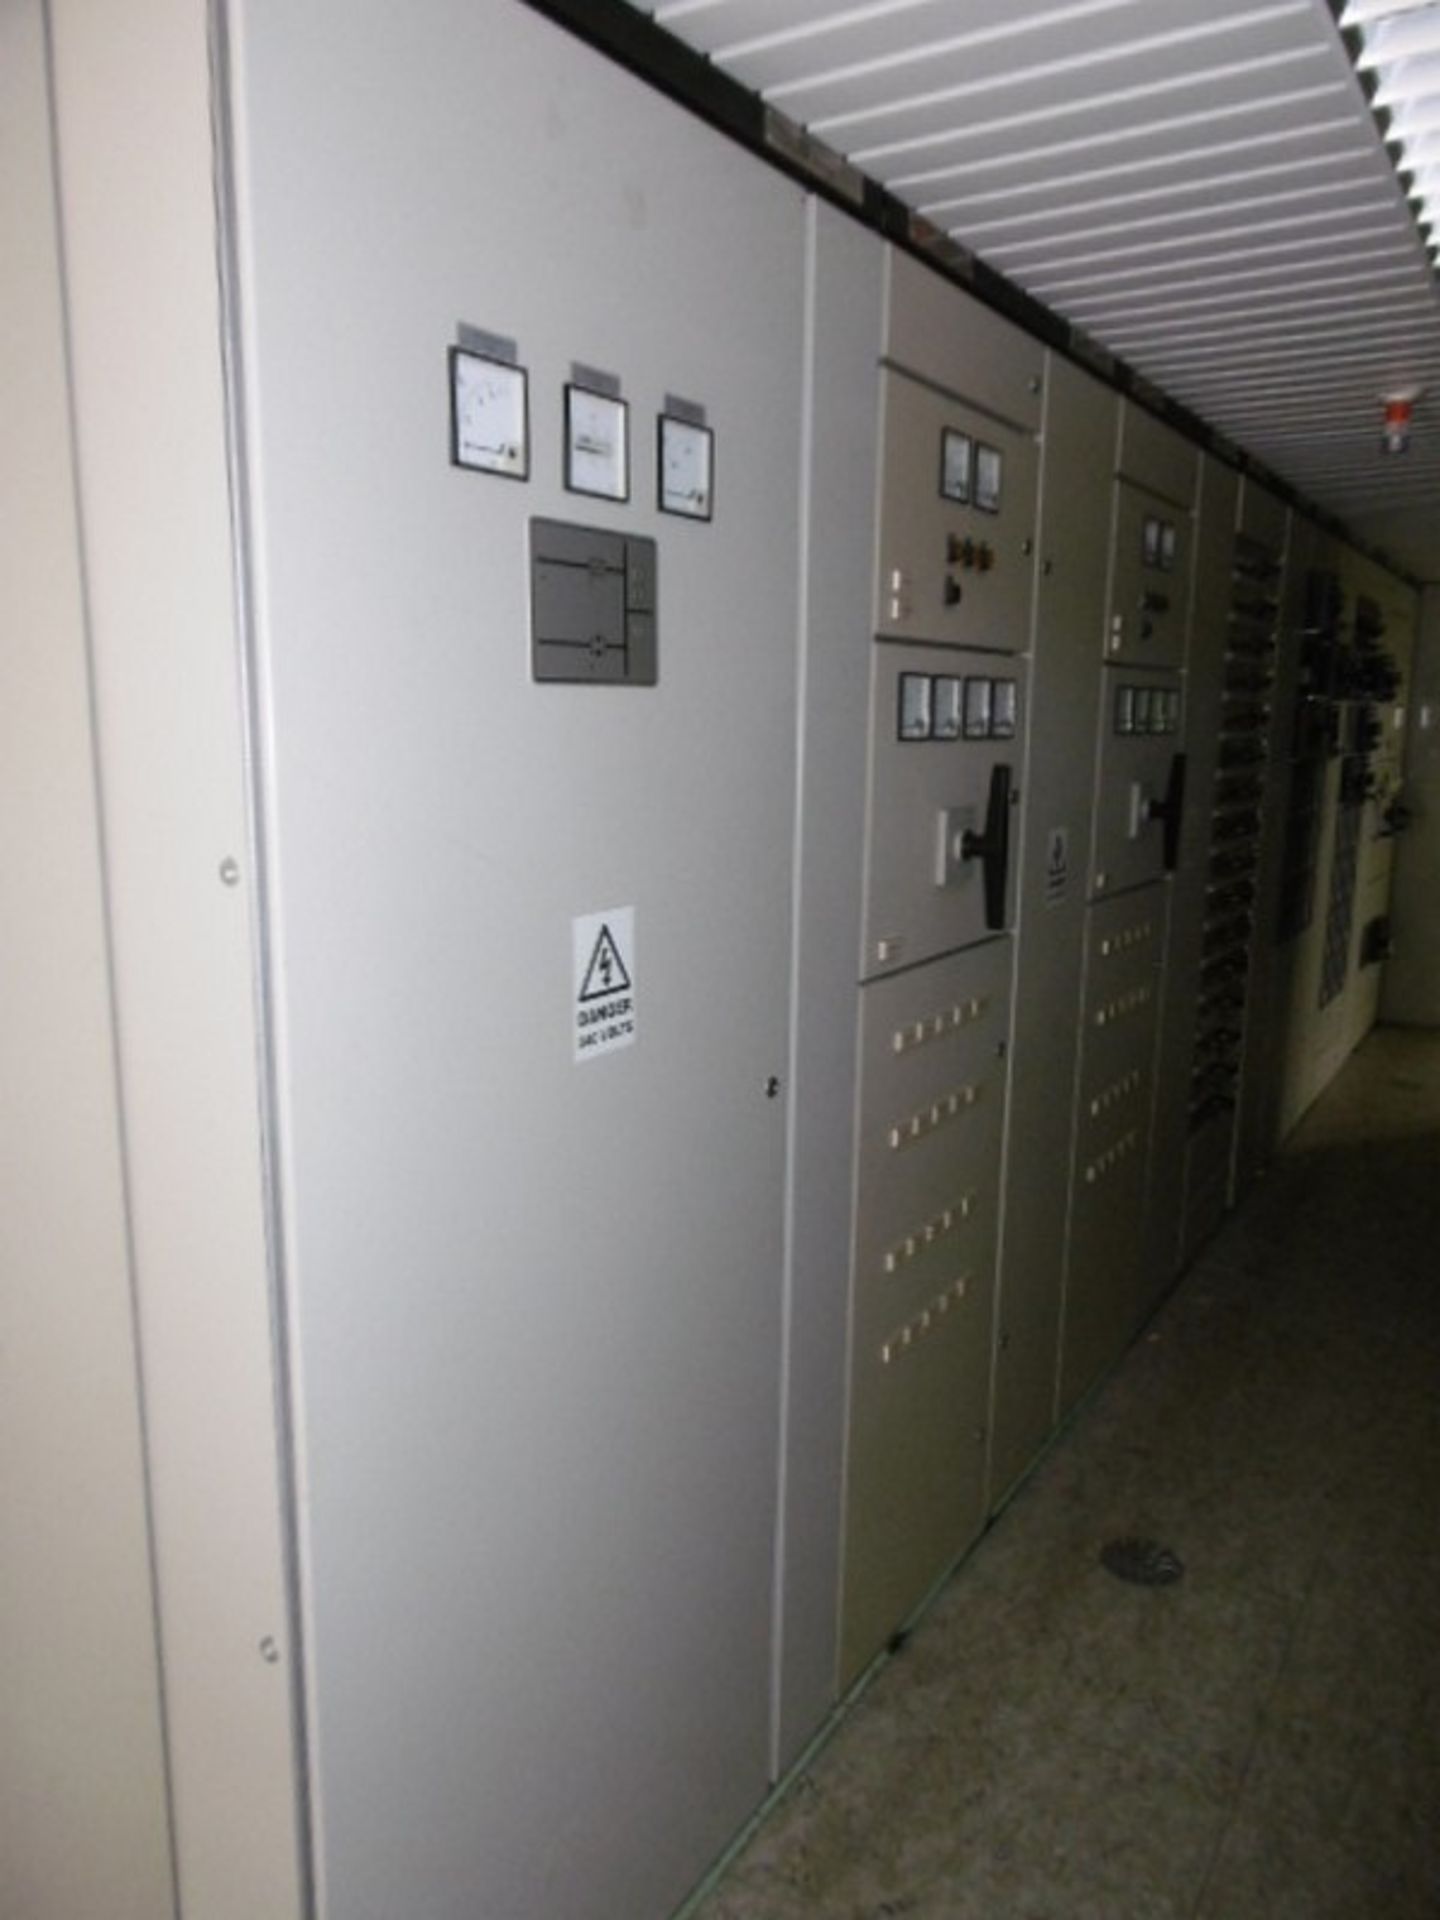 Large Qty Switchgear - From Gas Turbine 2 Control Module Building - Image 19 of 36